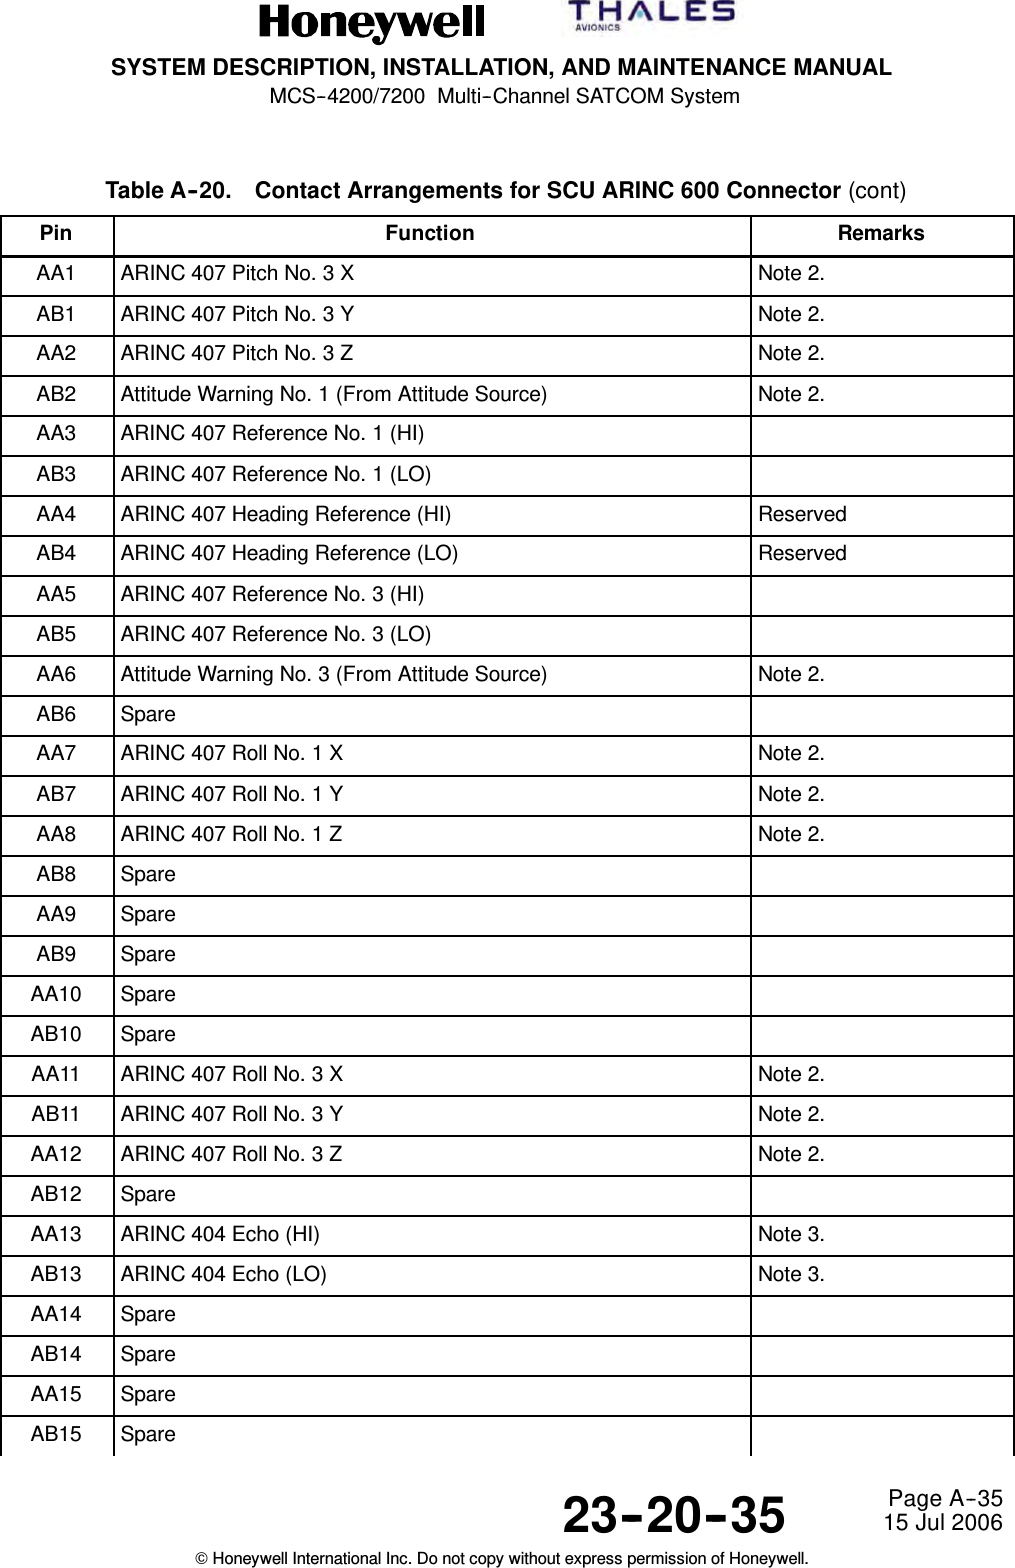 SYSTEM DESCRIPTION, INSTALLATION, AND MAINTENANCE MANUALMCS--4200/7200 Multi--Channel SATCOM System23--20--35 15 Jul 2006Honeywell International Inc. Do not copy without express permission of Honeywell.Page A--35Table A--20. Contact Arrangements for SCU ARINC 600 Connector (cont)Pin RemarksFunctionAA1 ARINC 407 Pitch No. 3 X Note 2.AB1 ARINC 407 Pitch No. 3 Y Note 2.AA2 ARINC 407 Pitch No. 3 Z Note 2.AB2 Attitude Warning No. 1 (From Attitude Source) Note 2.AA3 ARINC 407 Reference No. 1 (HI)AB3 ARINC 407 Reference No. 1 (LO)AA4 ARINC 407 Heading Reference (HI) ReservedAB4 ARINC 407 Heading Reference (LO) ReservedAA5 ARINC 407 Reference No. 3 (HI)AB5 ARINC 407 Reference No. 3 (LO)AA6 Attitude Warning No. 3 (From Attitude Source) Note 2.AB6 SpareAA7 ARINC 407 Roll No. 1 X Note 2.AB7 ARINC 407 Roll No. 1 Y Note 2.AA8 ARINC 407 Roll No. 1 Z Note 2.AB8 SpareAA9 SpareAB9 SpareAA10 SpareAB10 SpareAA11 ARINC 407 Roll No. 3 X Note 2.AB11 ARINC 407 Roll No. 3 Y Note 2.AA12 ARINC 407 Roll No. 3 Z Note 2.AB12 SpareAA13 ARINC 404 Echo (HI) Note 3.AB13 ARINC 404 Echo (LO) Note 3.AA14 SpareAB14 SpareAA15 SpareAB15 Spare